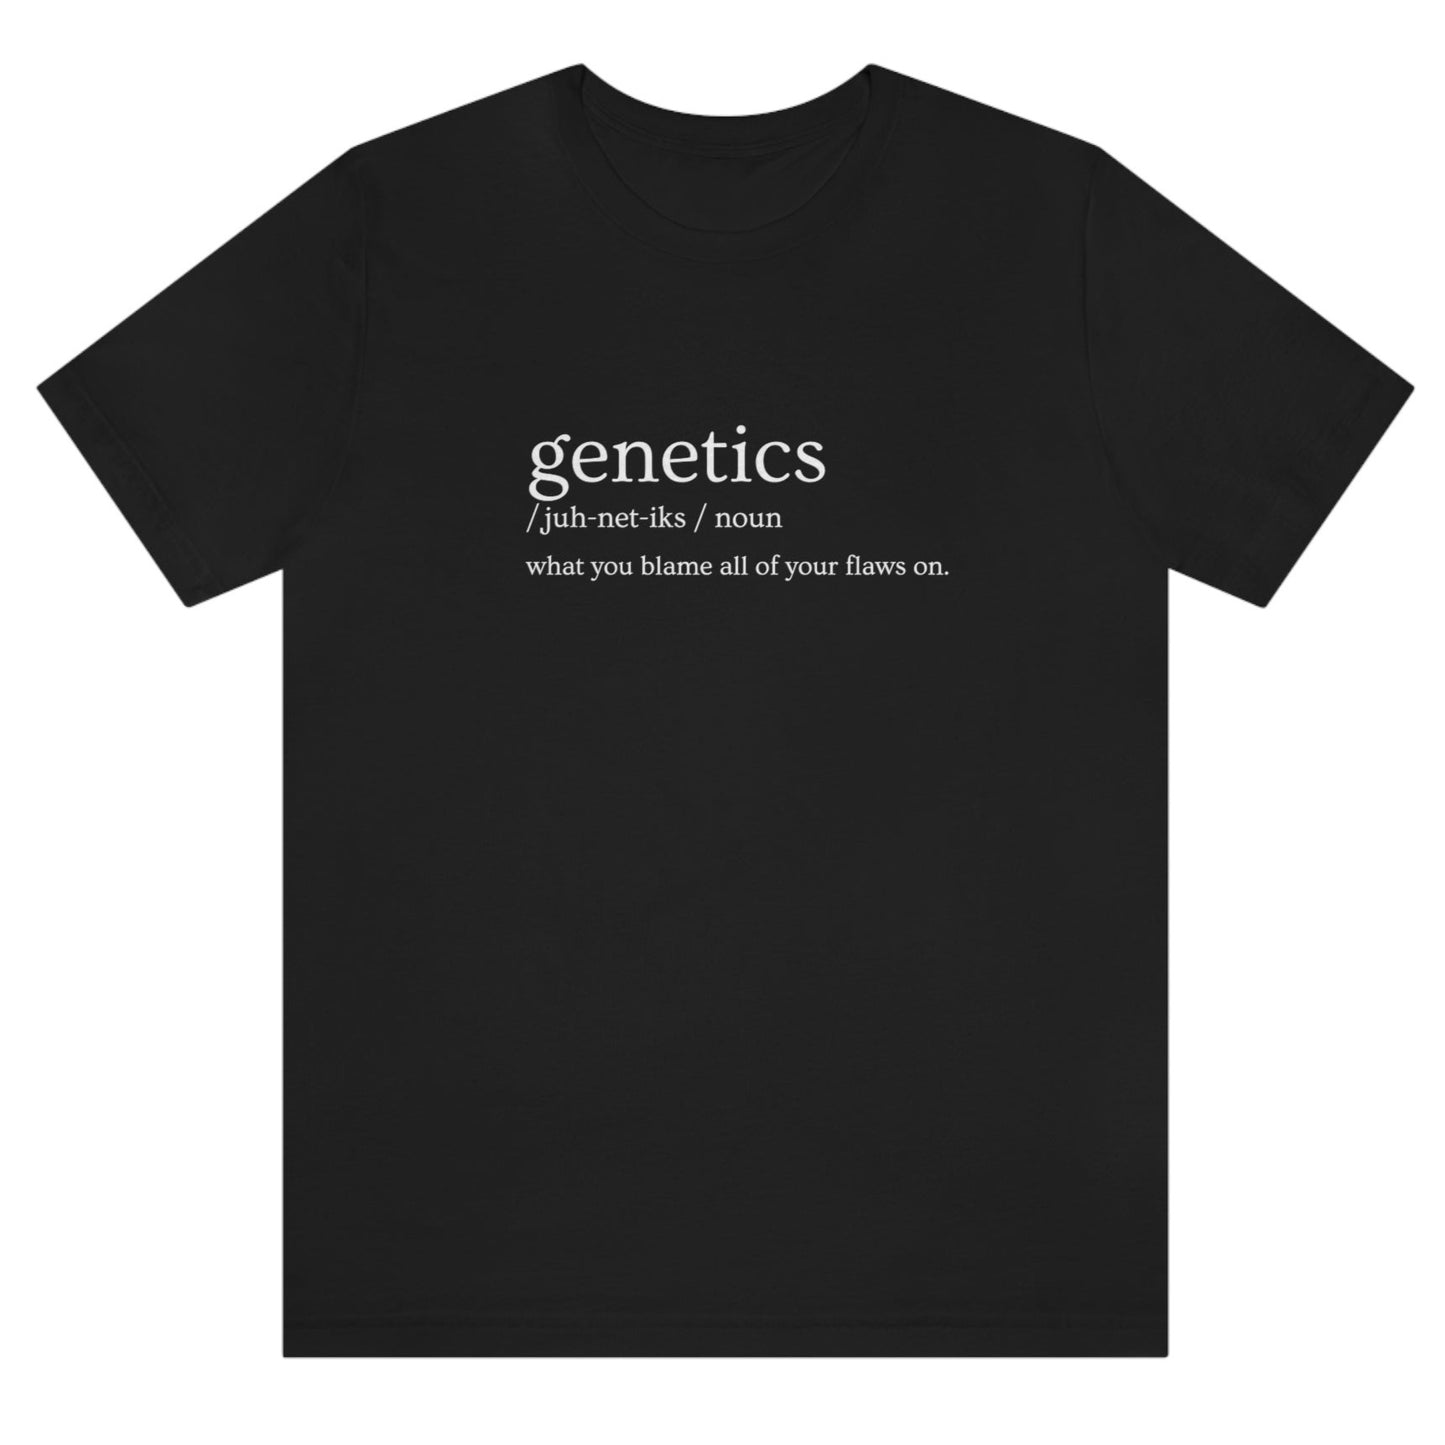 genetics-what-you-blame-all-of-your-flaws-on-black-t-shirt